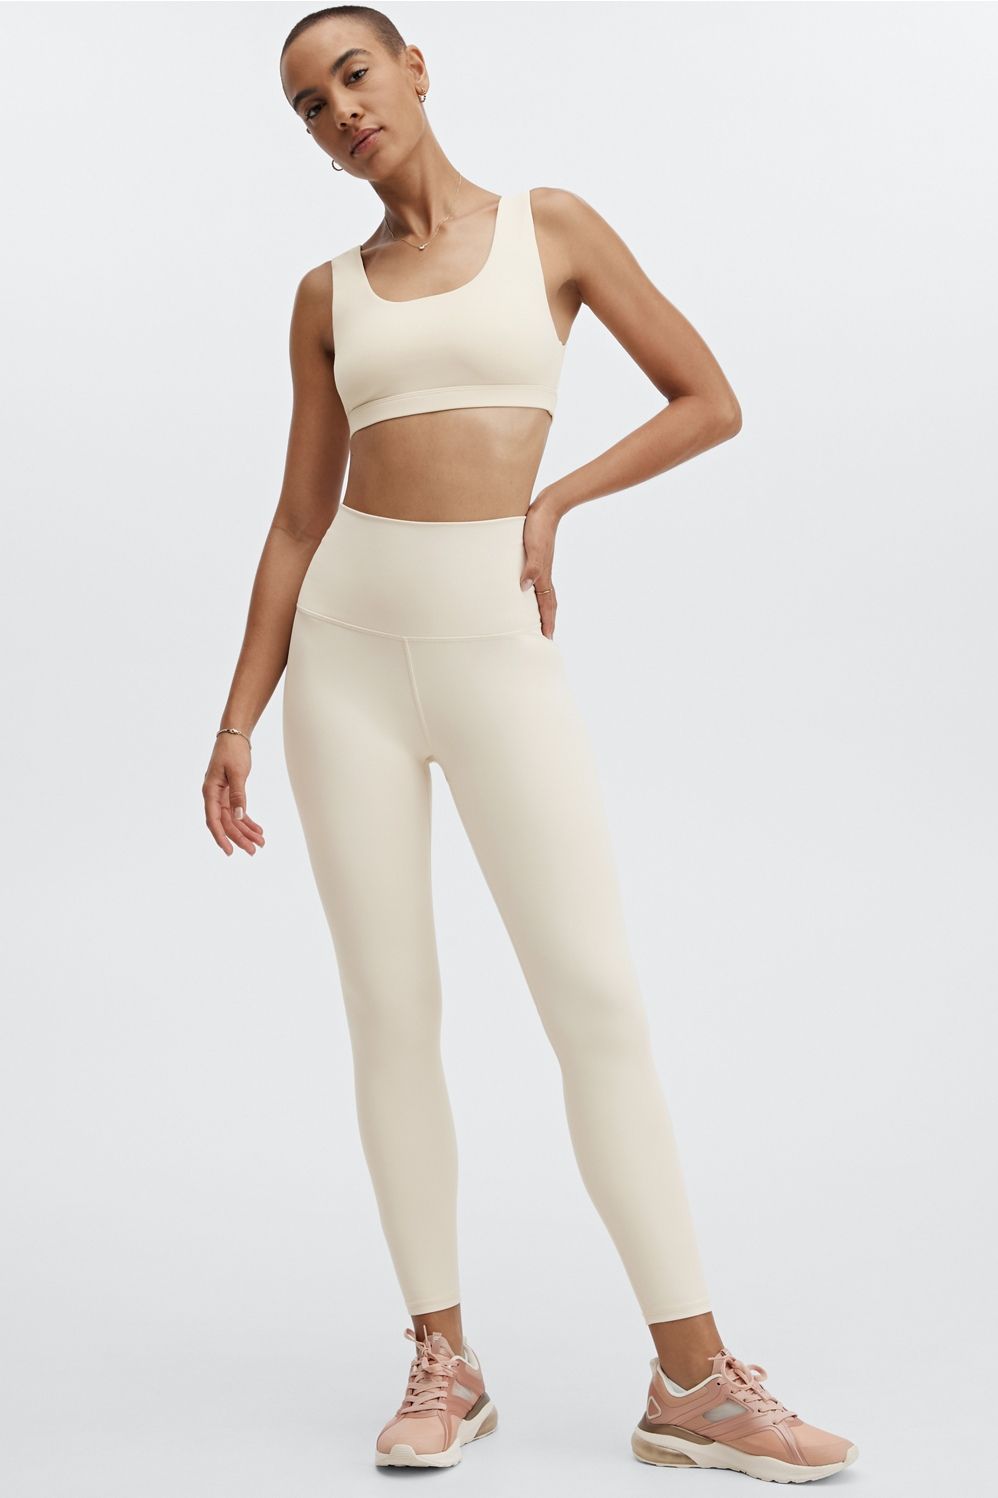 Ultra High-Waisted PureLuxe 7/8 | Fabletics - North America